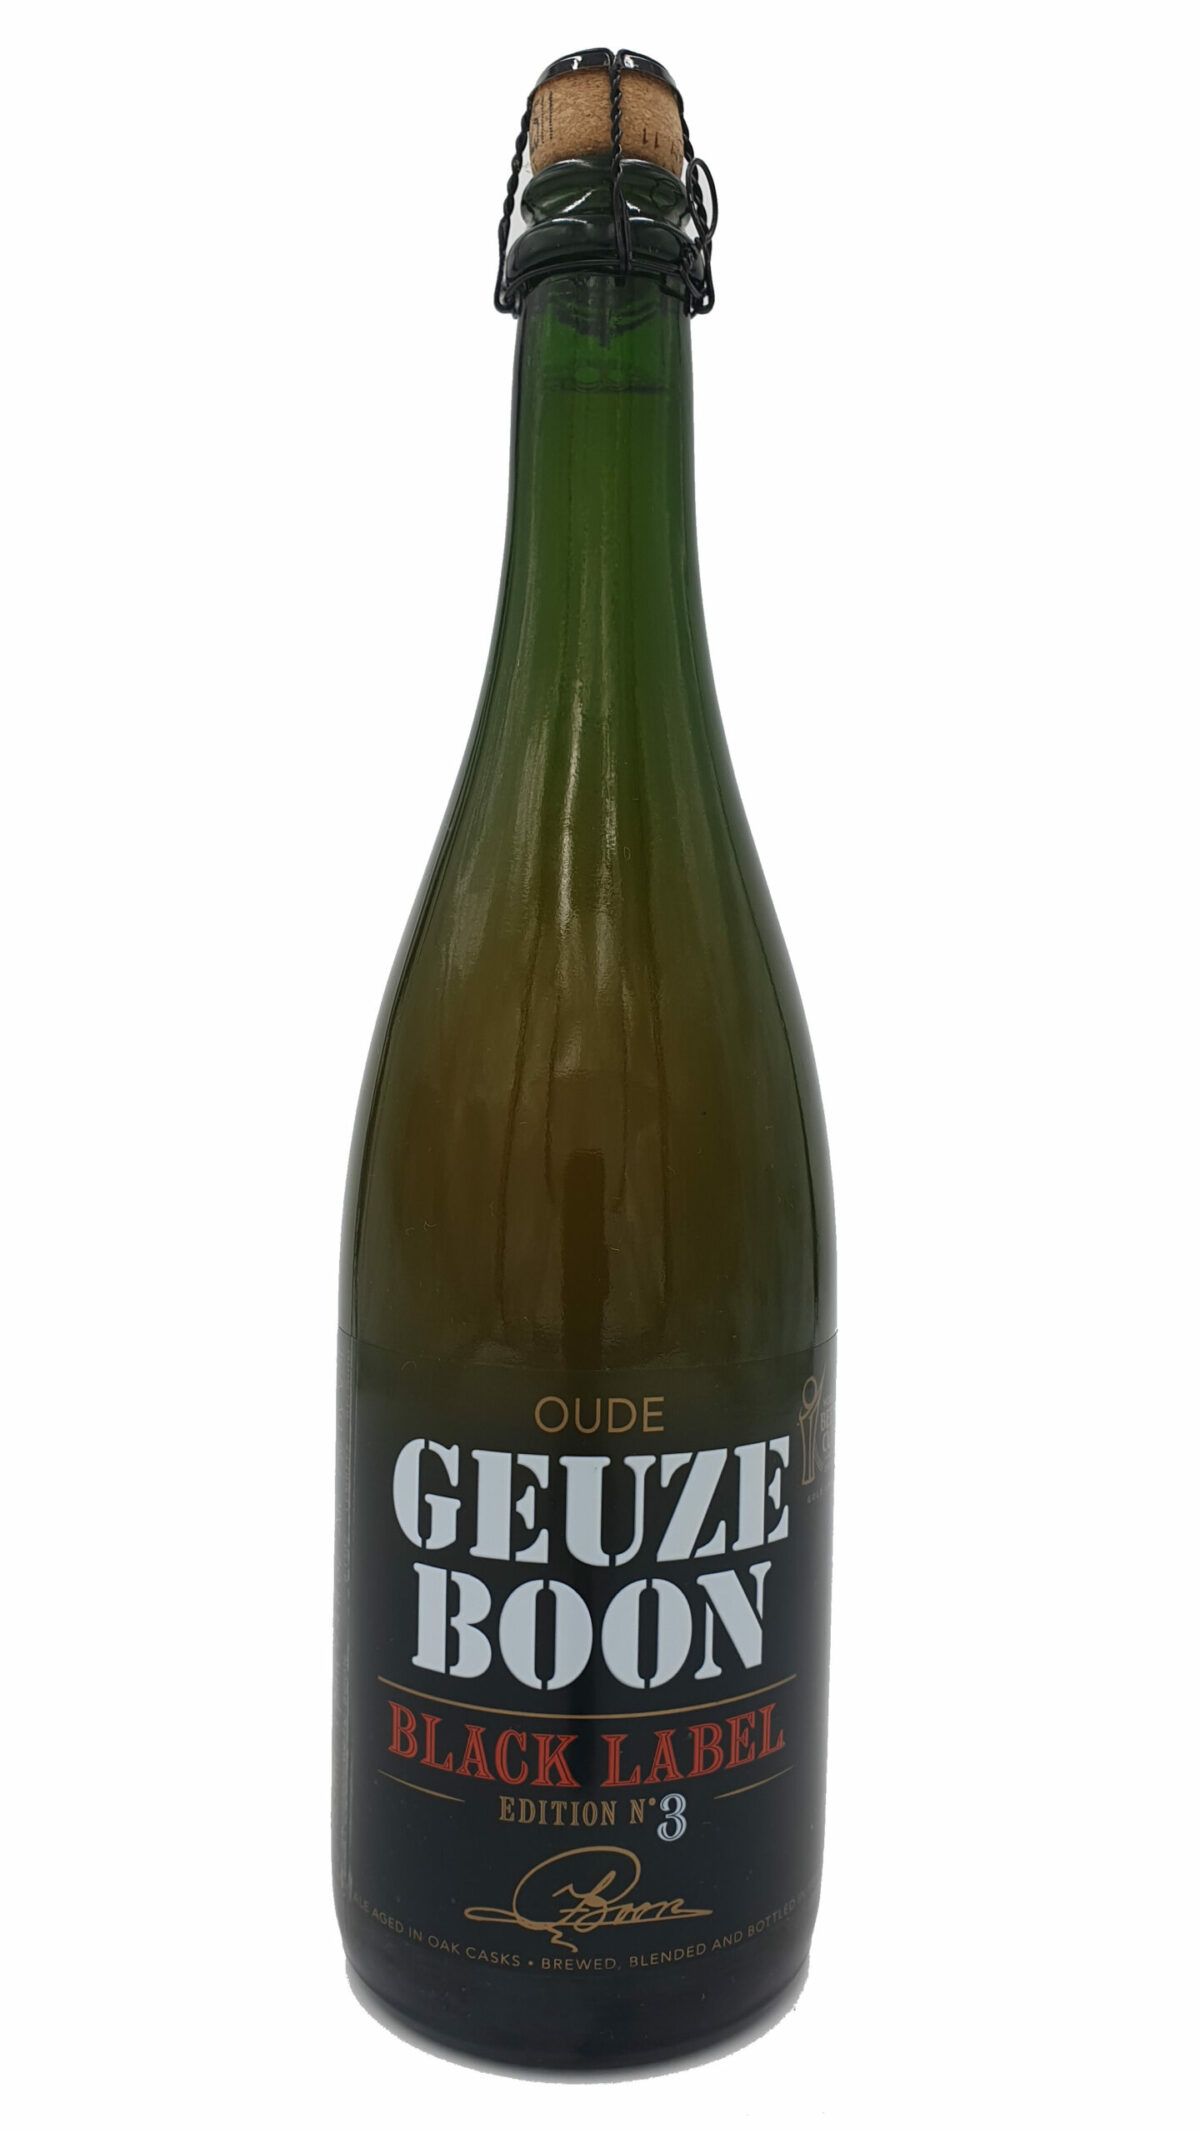 boon oude geuze black label edition 3